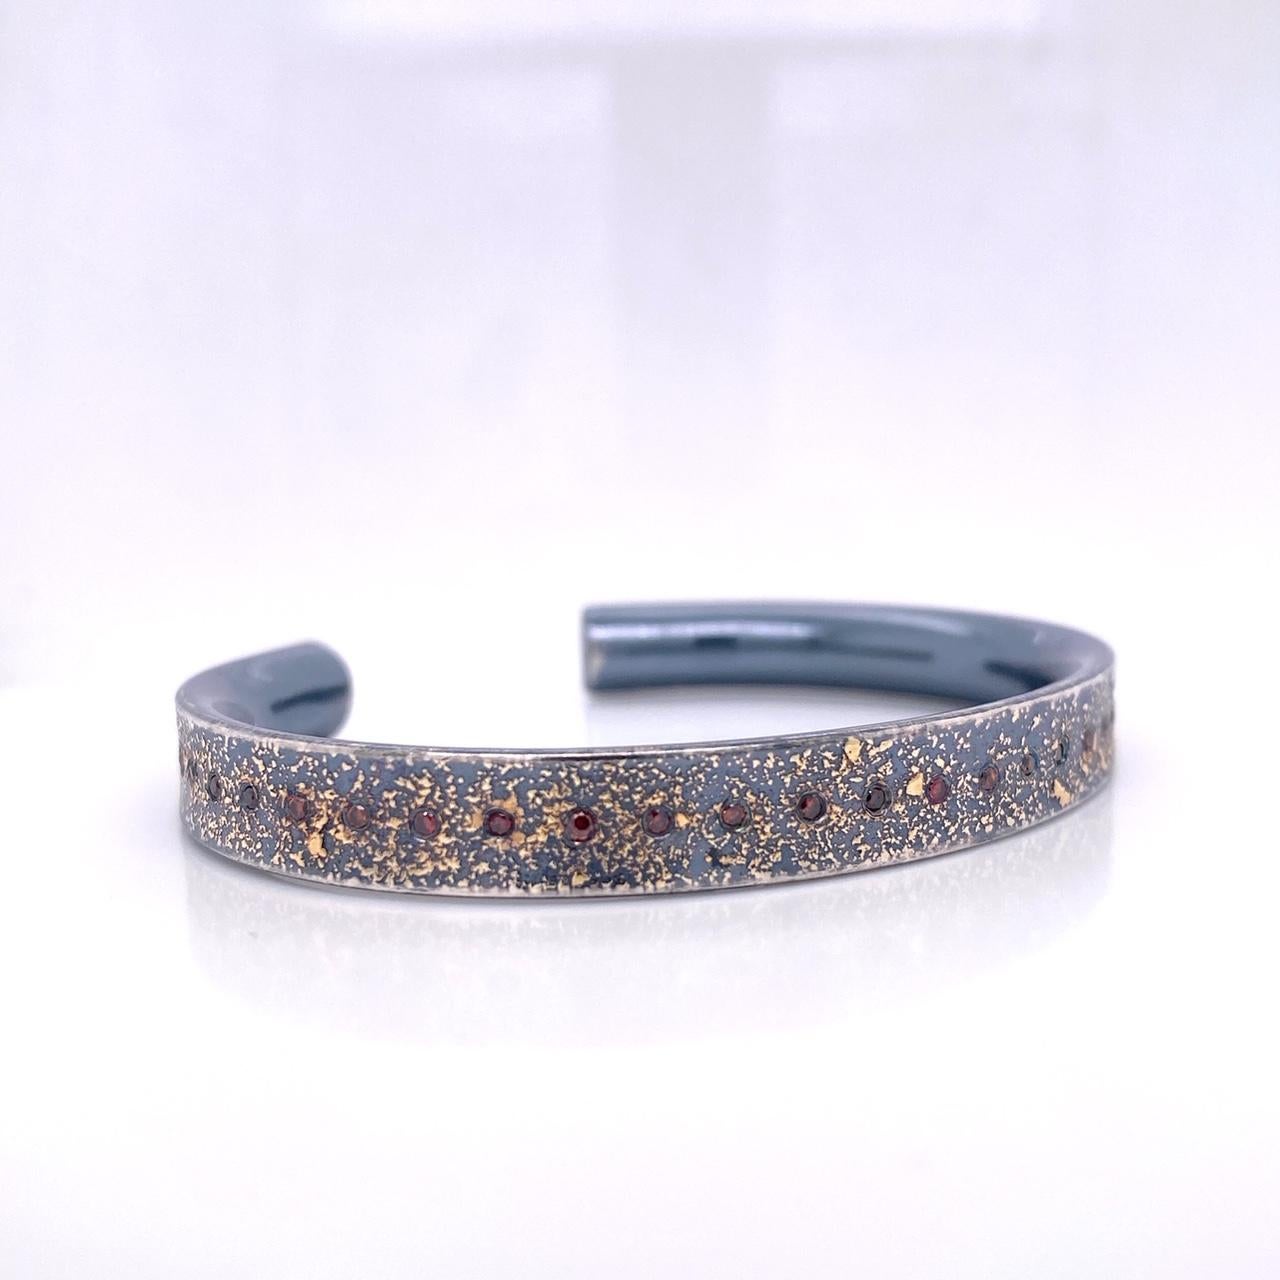 An oxidized sterling silver narrow cuff with 24k gold dust, set with 40, .256ct cabernet colored diamonds. This cuff was made and designed by llyn strong.